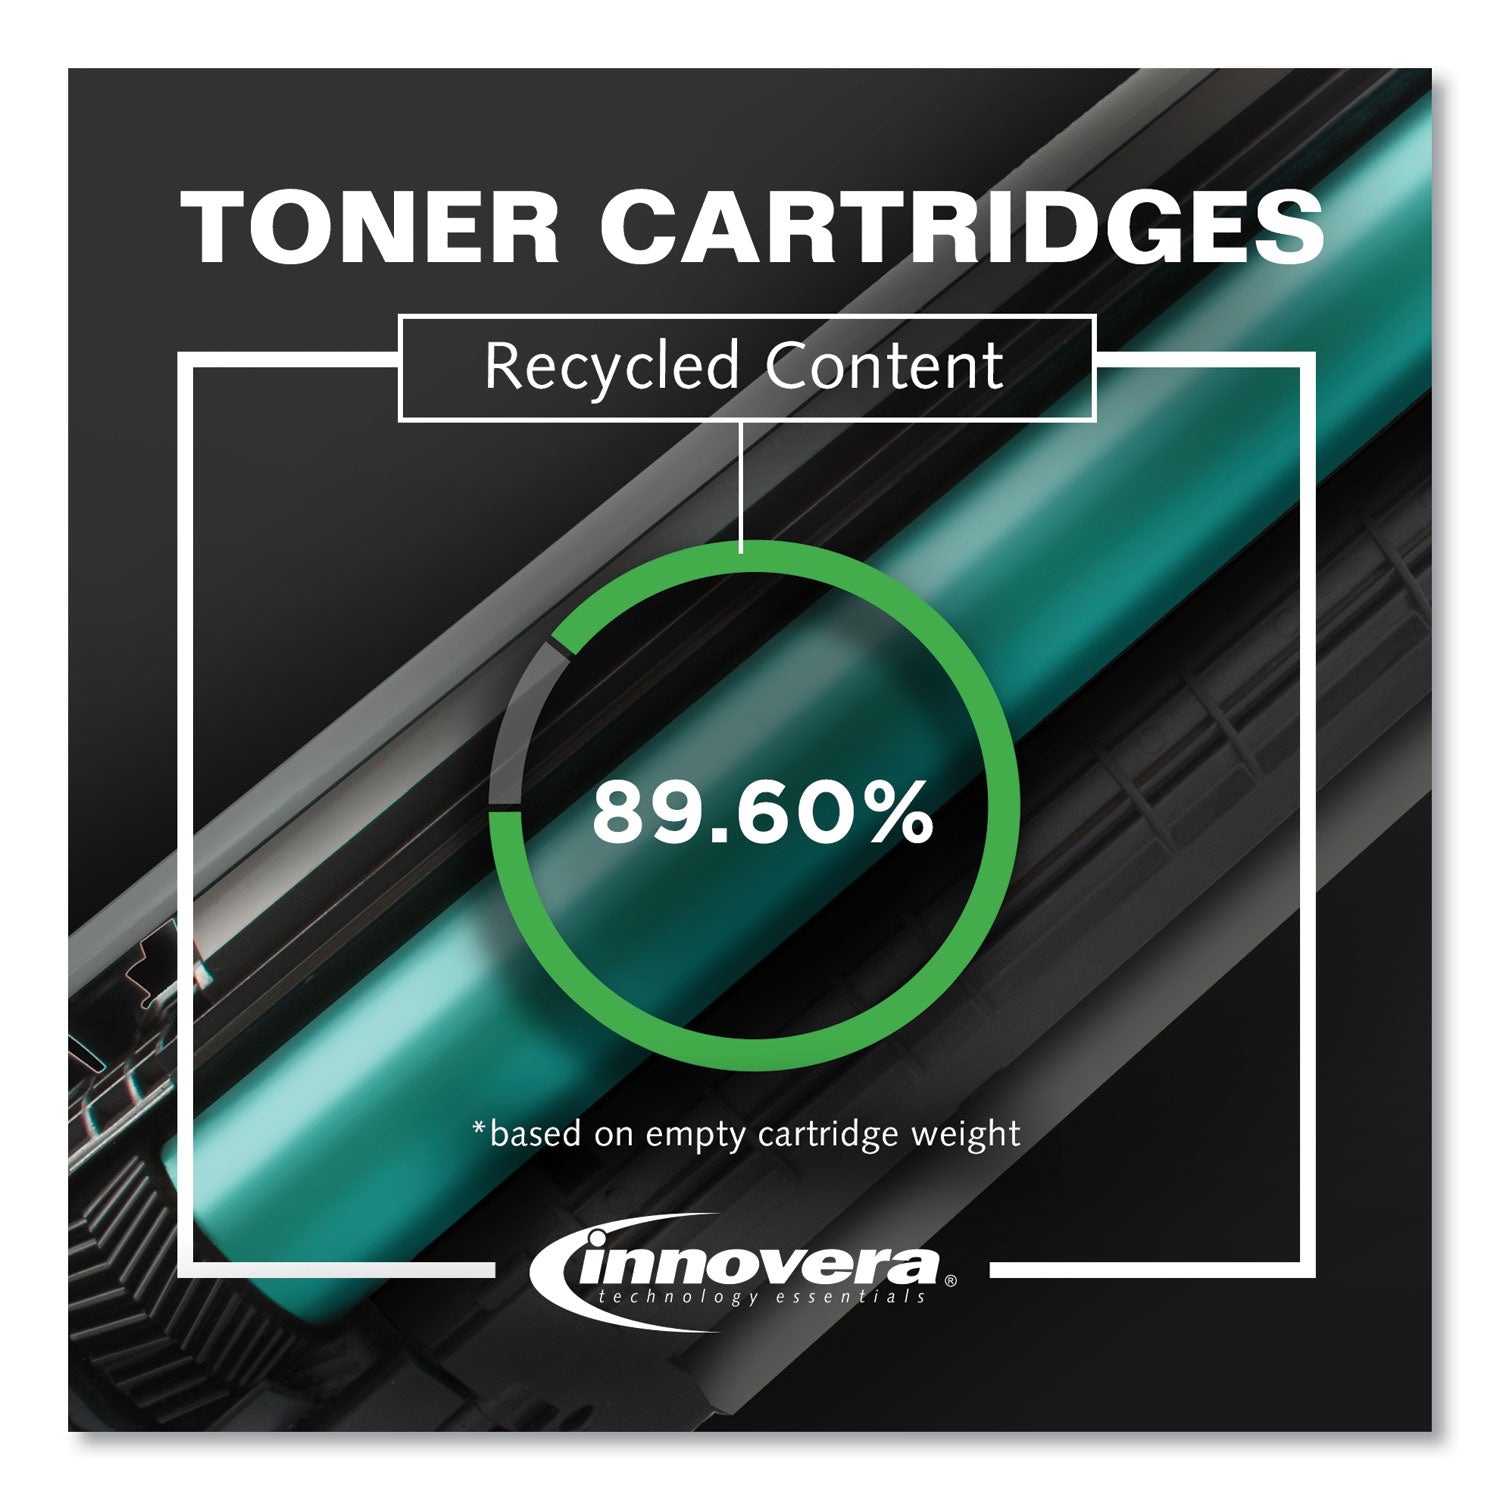 Remanufactured Black Toner, Replacement for 120 (2617B001), 5,000 Page-Yield - 